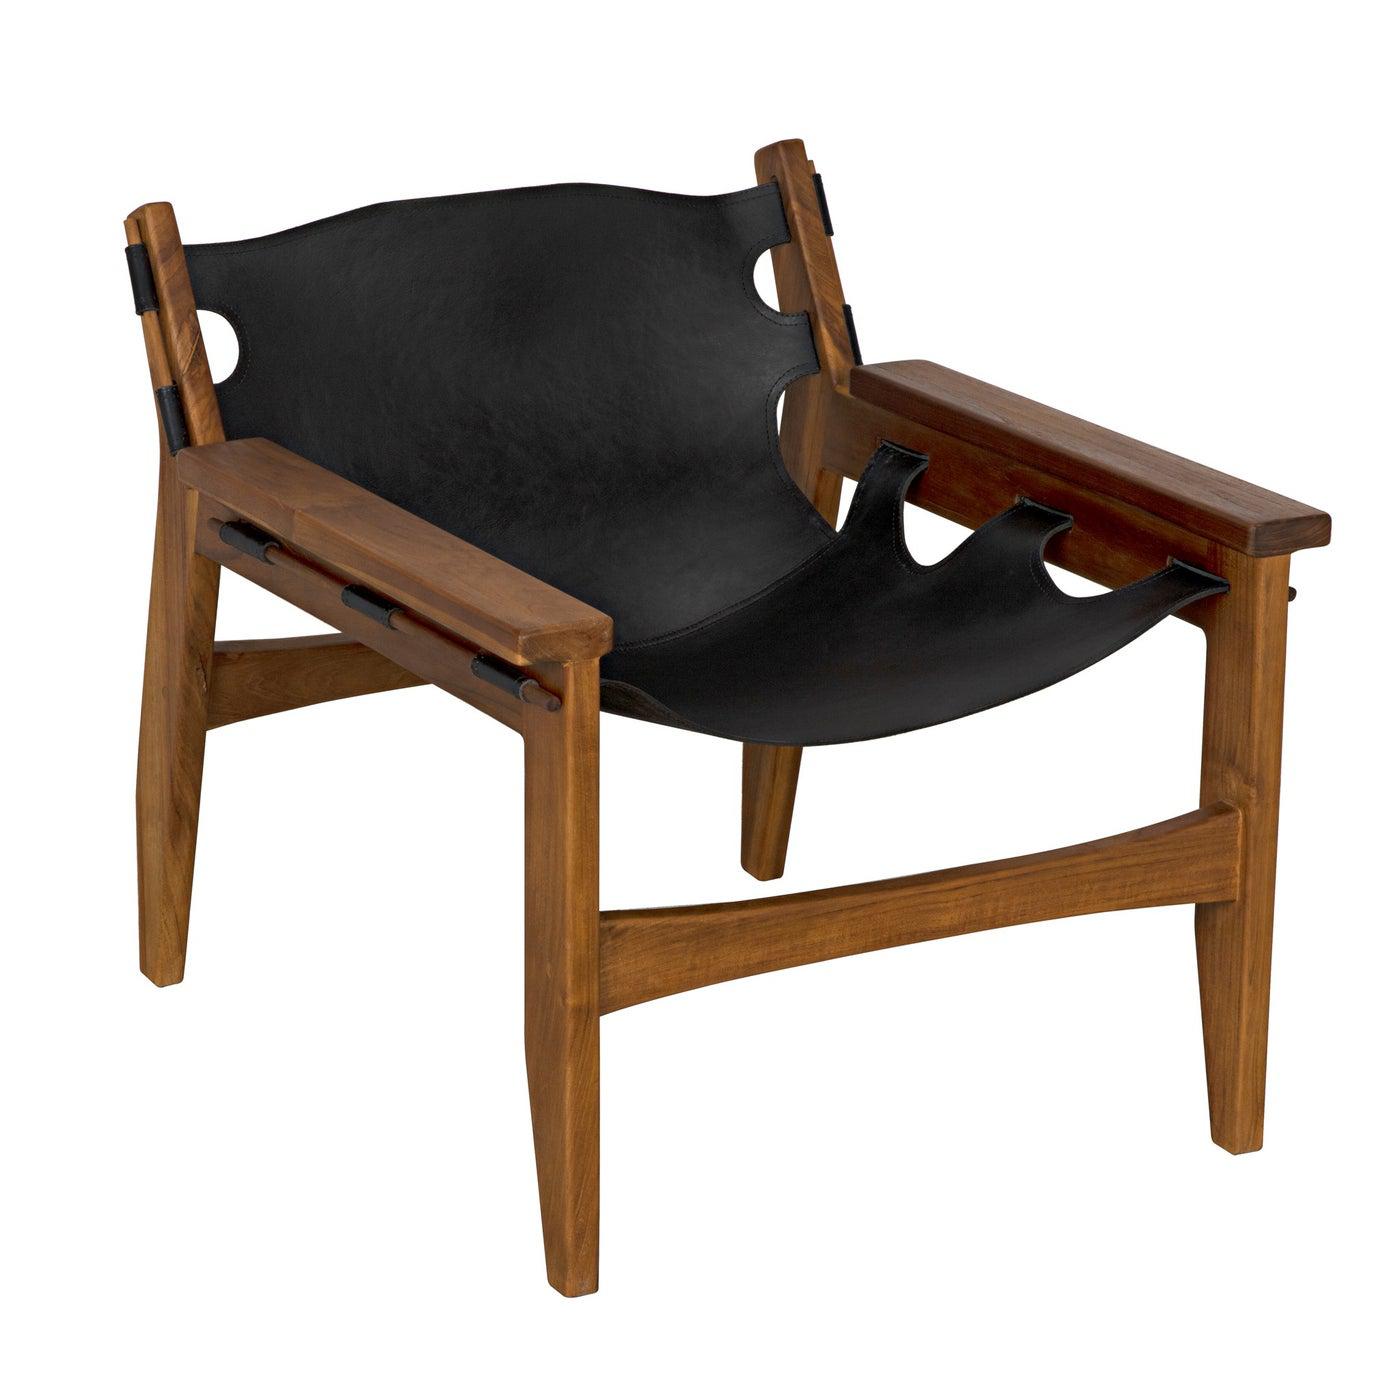 Nomo Chair, Teak with Leather